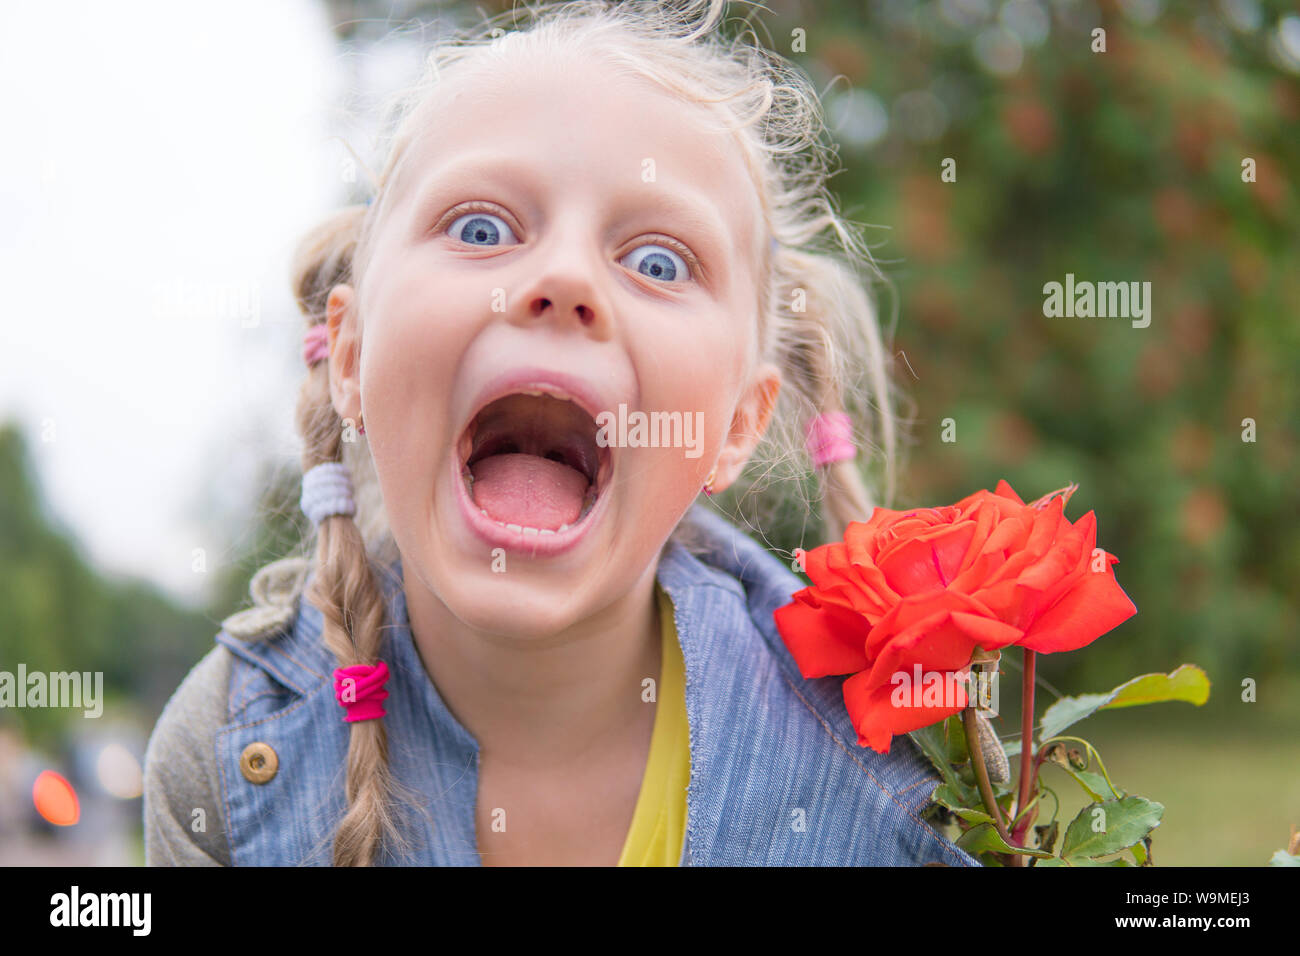 Marveled at the beautiful red rose, funy Stock Photo